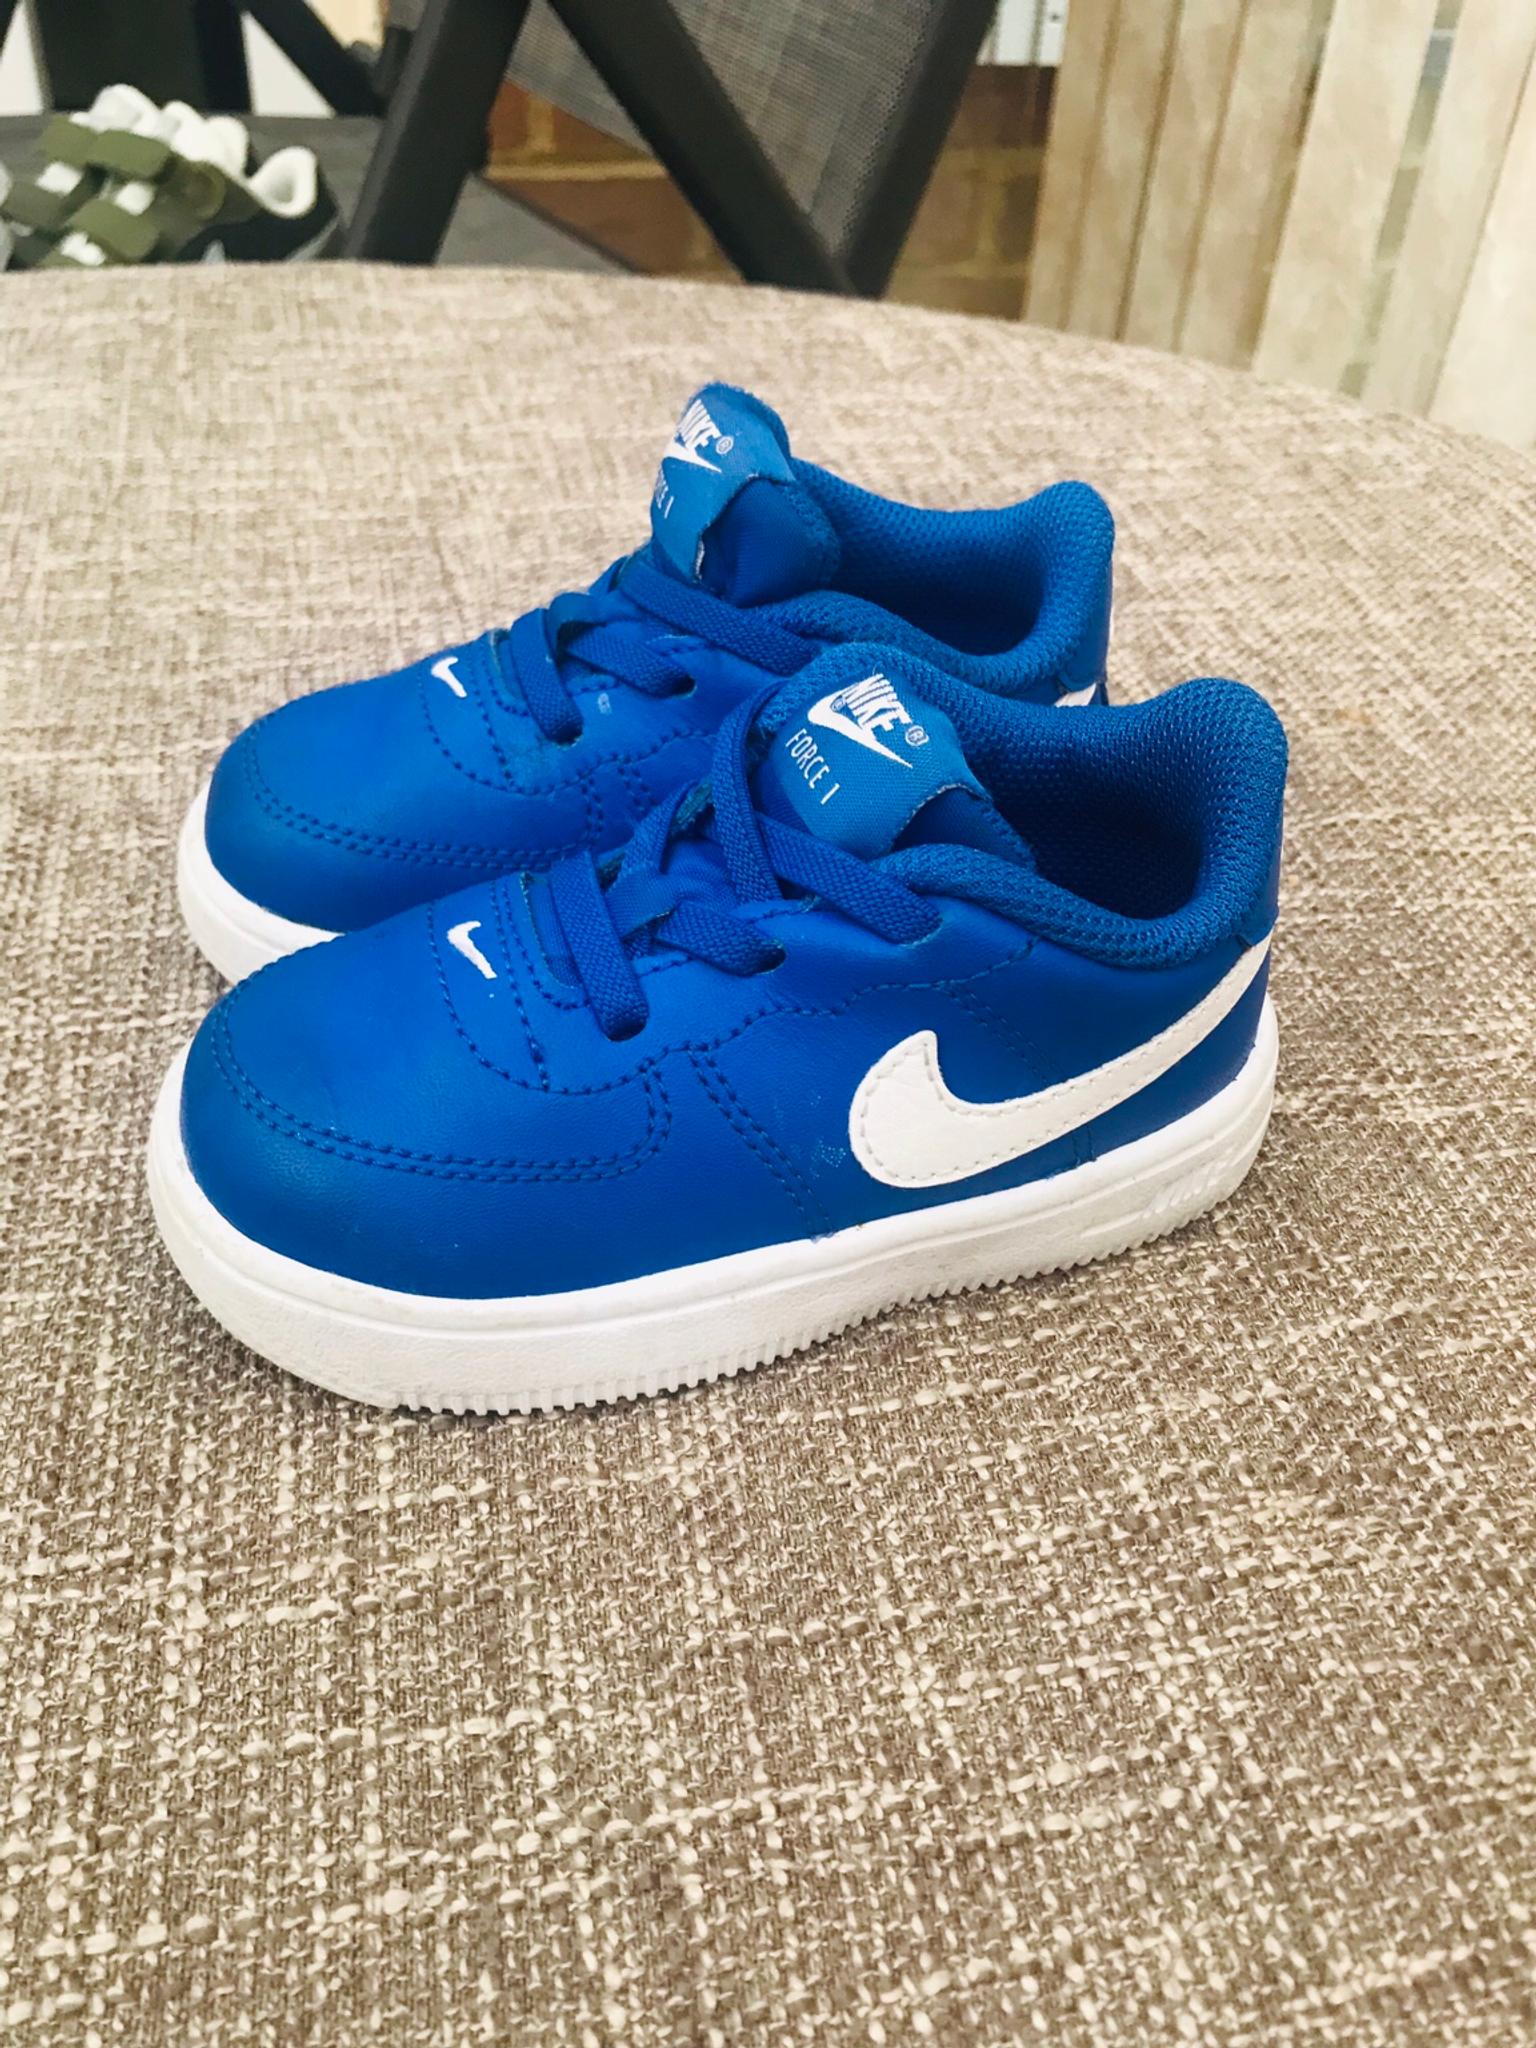 blue baby nike shoes 